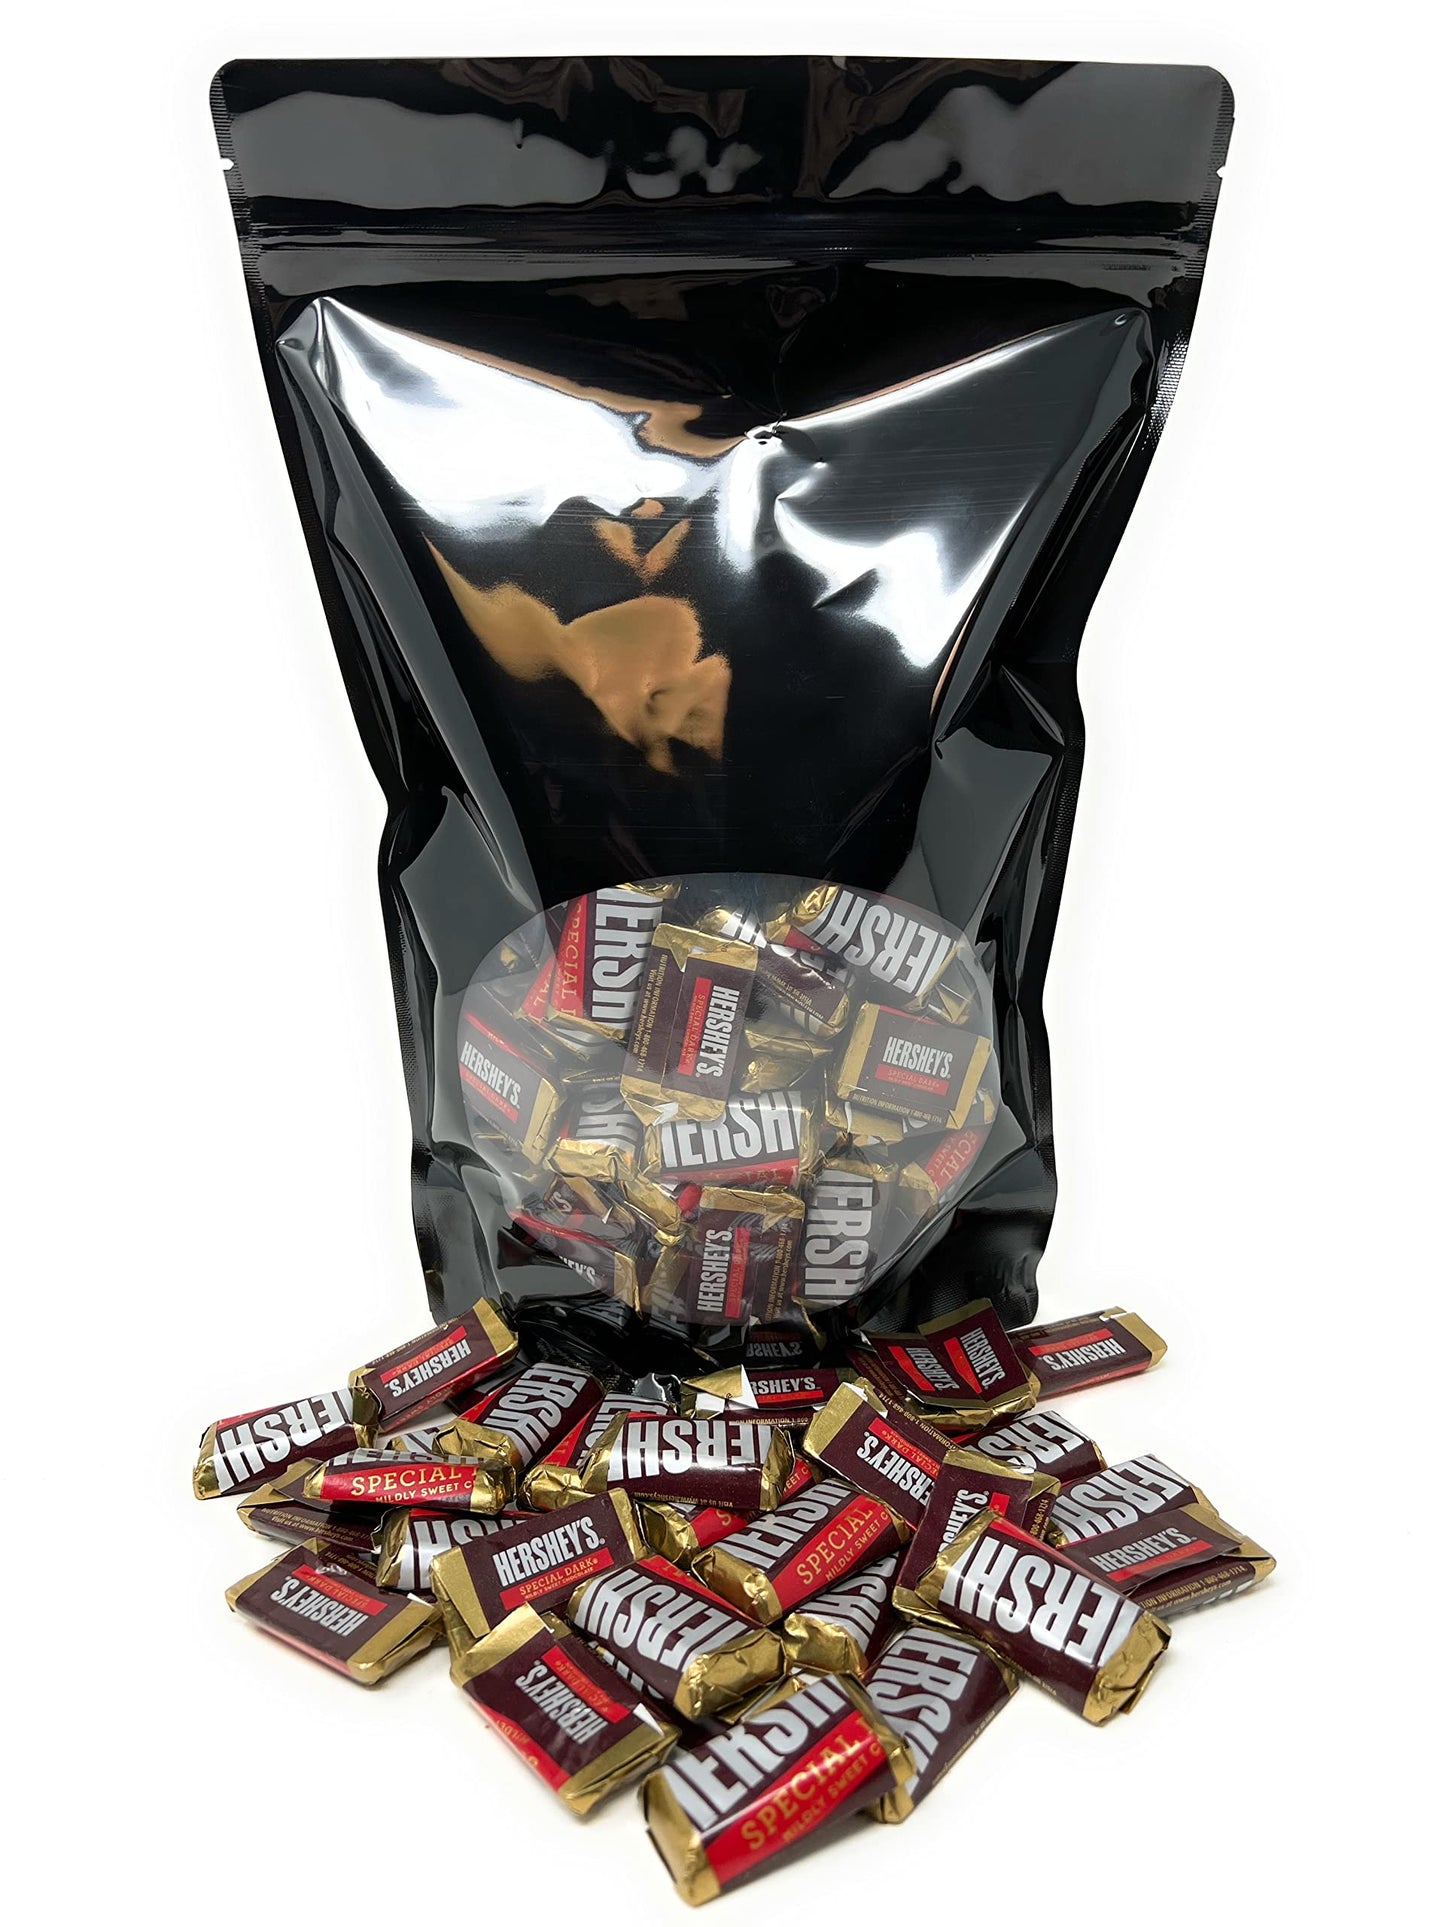 MARS Special Dark Chocolate Single Flavor Favorites Mini Bars Individually Wrapped In Resealable Bag 3 Lbs 150+ Pieces (48 Oz)